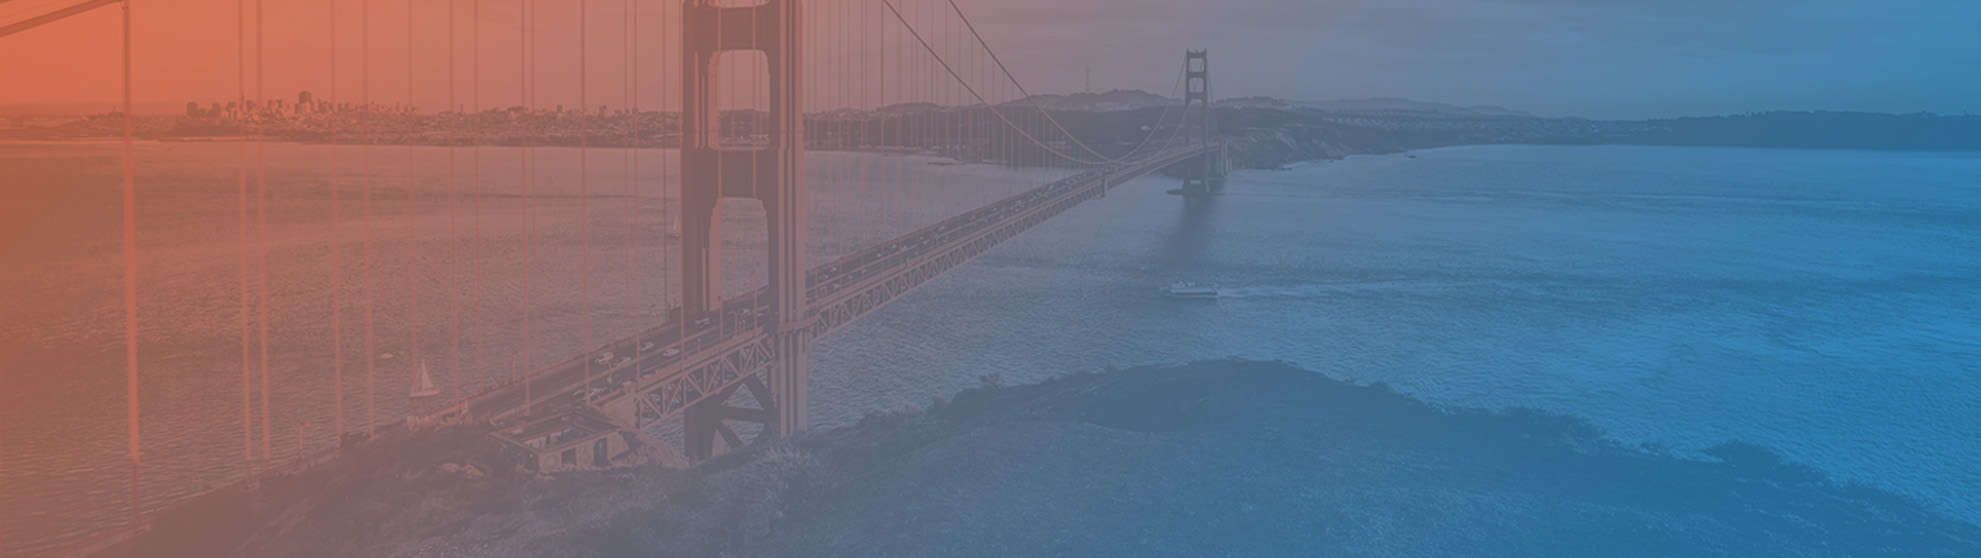 The Golden Gate bridge overlaid with a blue and orange gradient